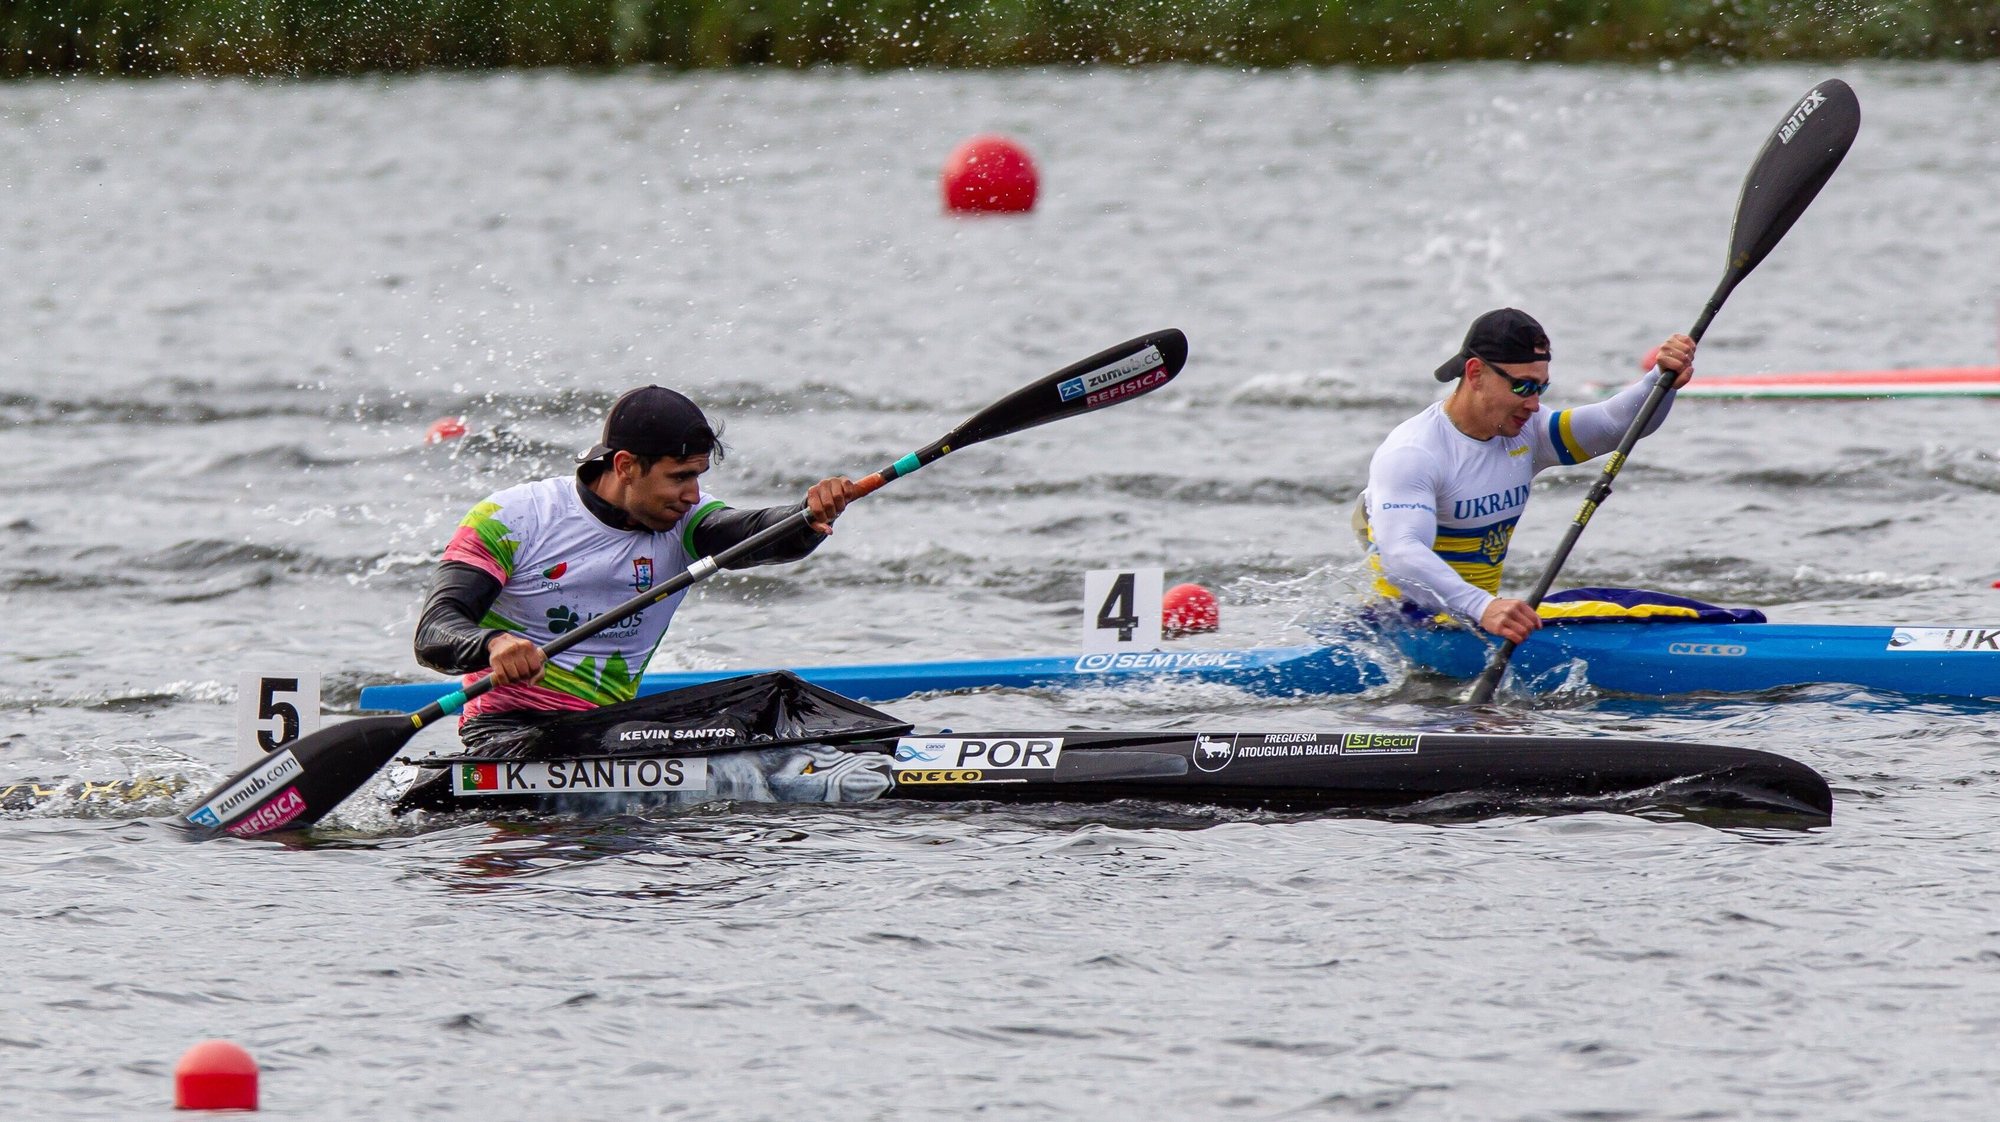 epa09982510 Kevin Santos (L) of Portugal and Dmytro Danylenko (R) of Ukraine compete in the men&#039;s K1 200m heats at the ICF Kayak and Canoe World Cup event in Poznan, Poland, 28 May 2022.  EPA/Pawel Jaskolka POLAND OUT